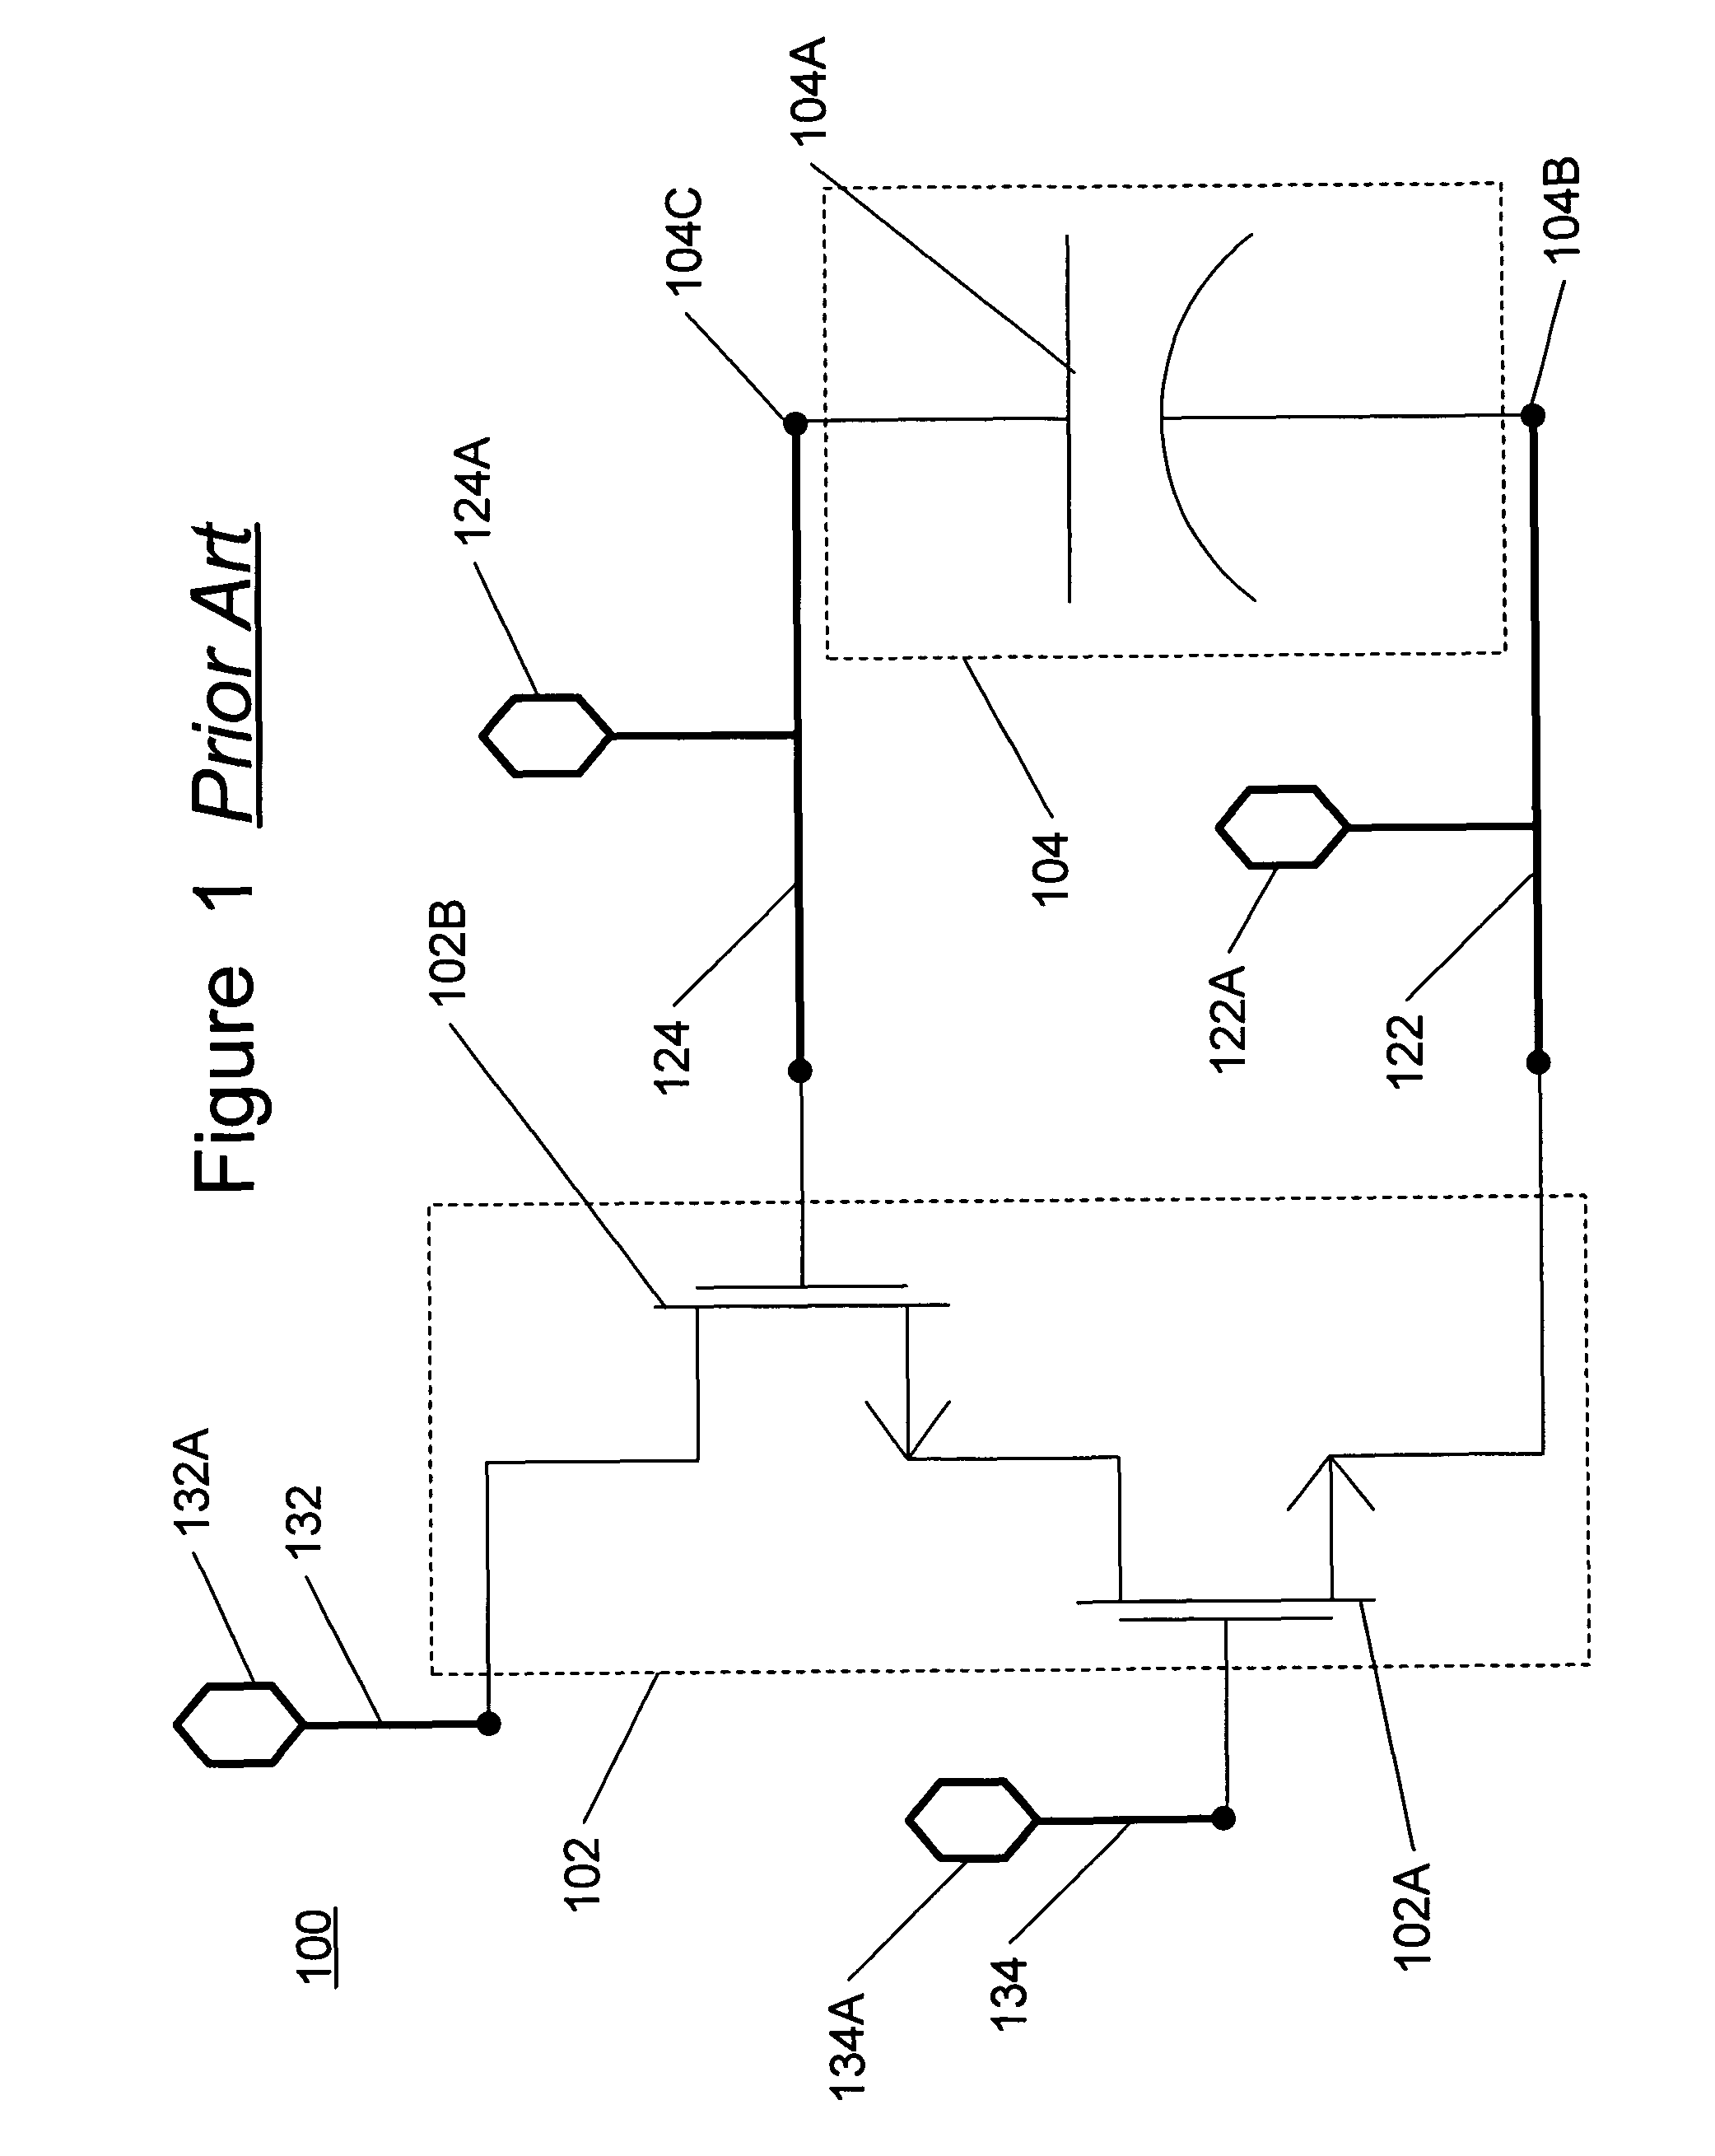 RF power amplifier integrated circuit and unit cell